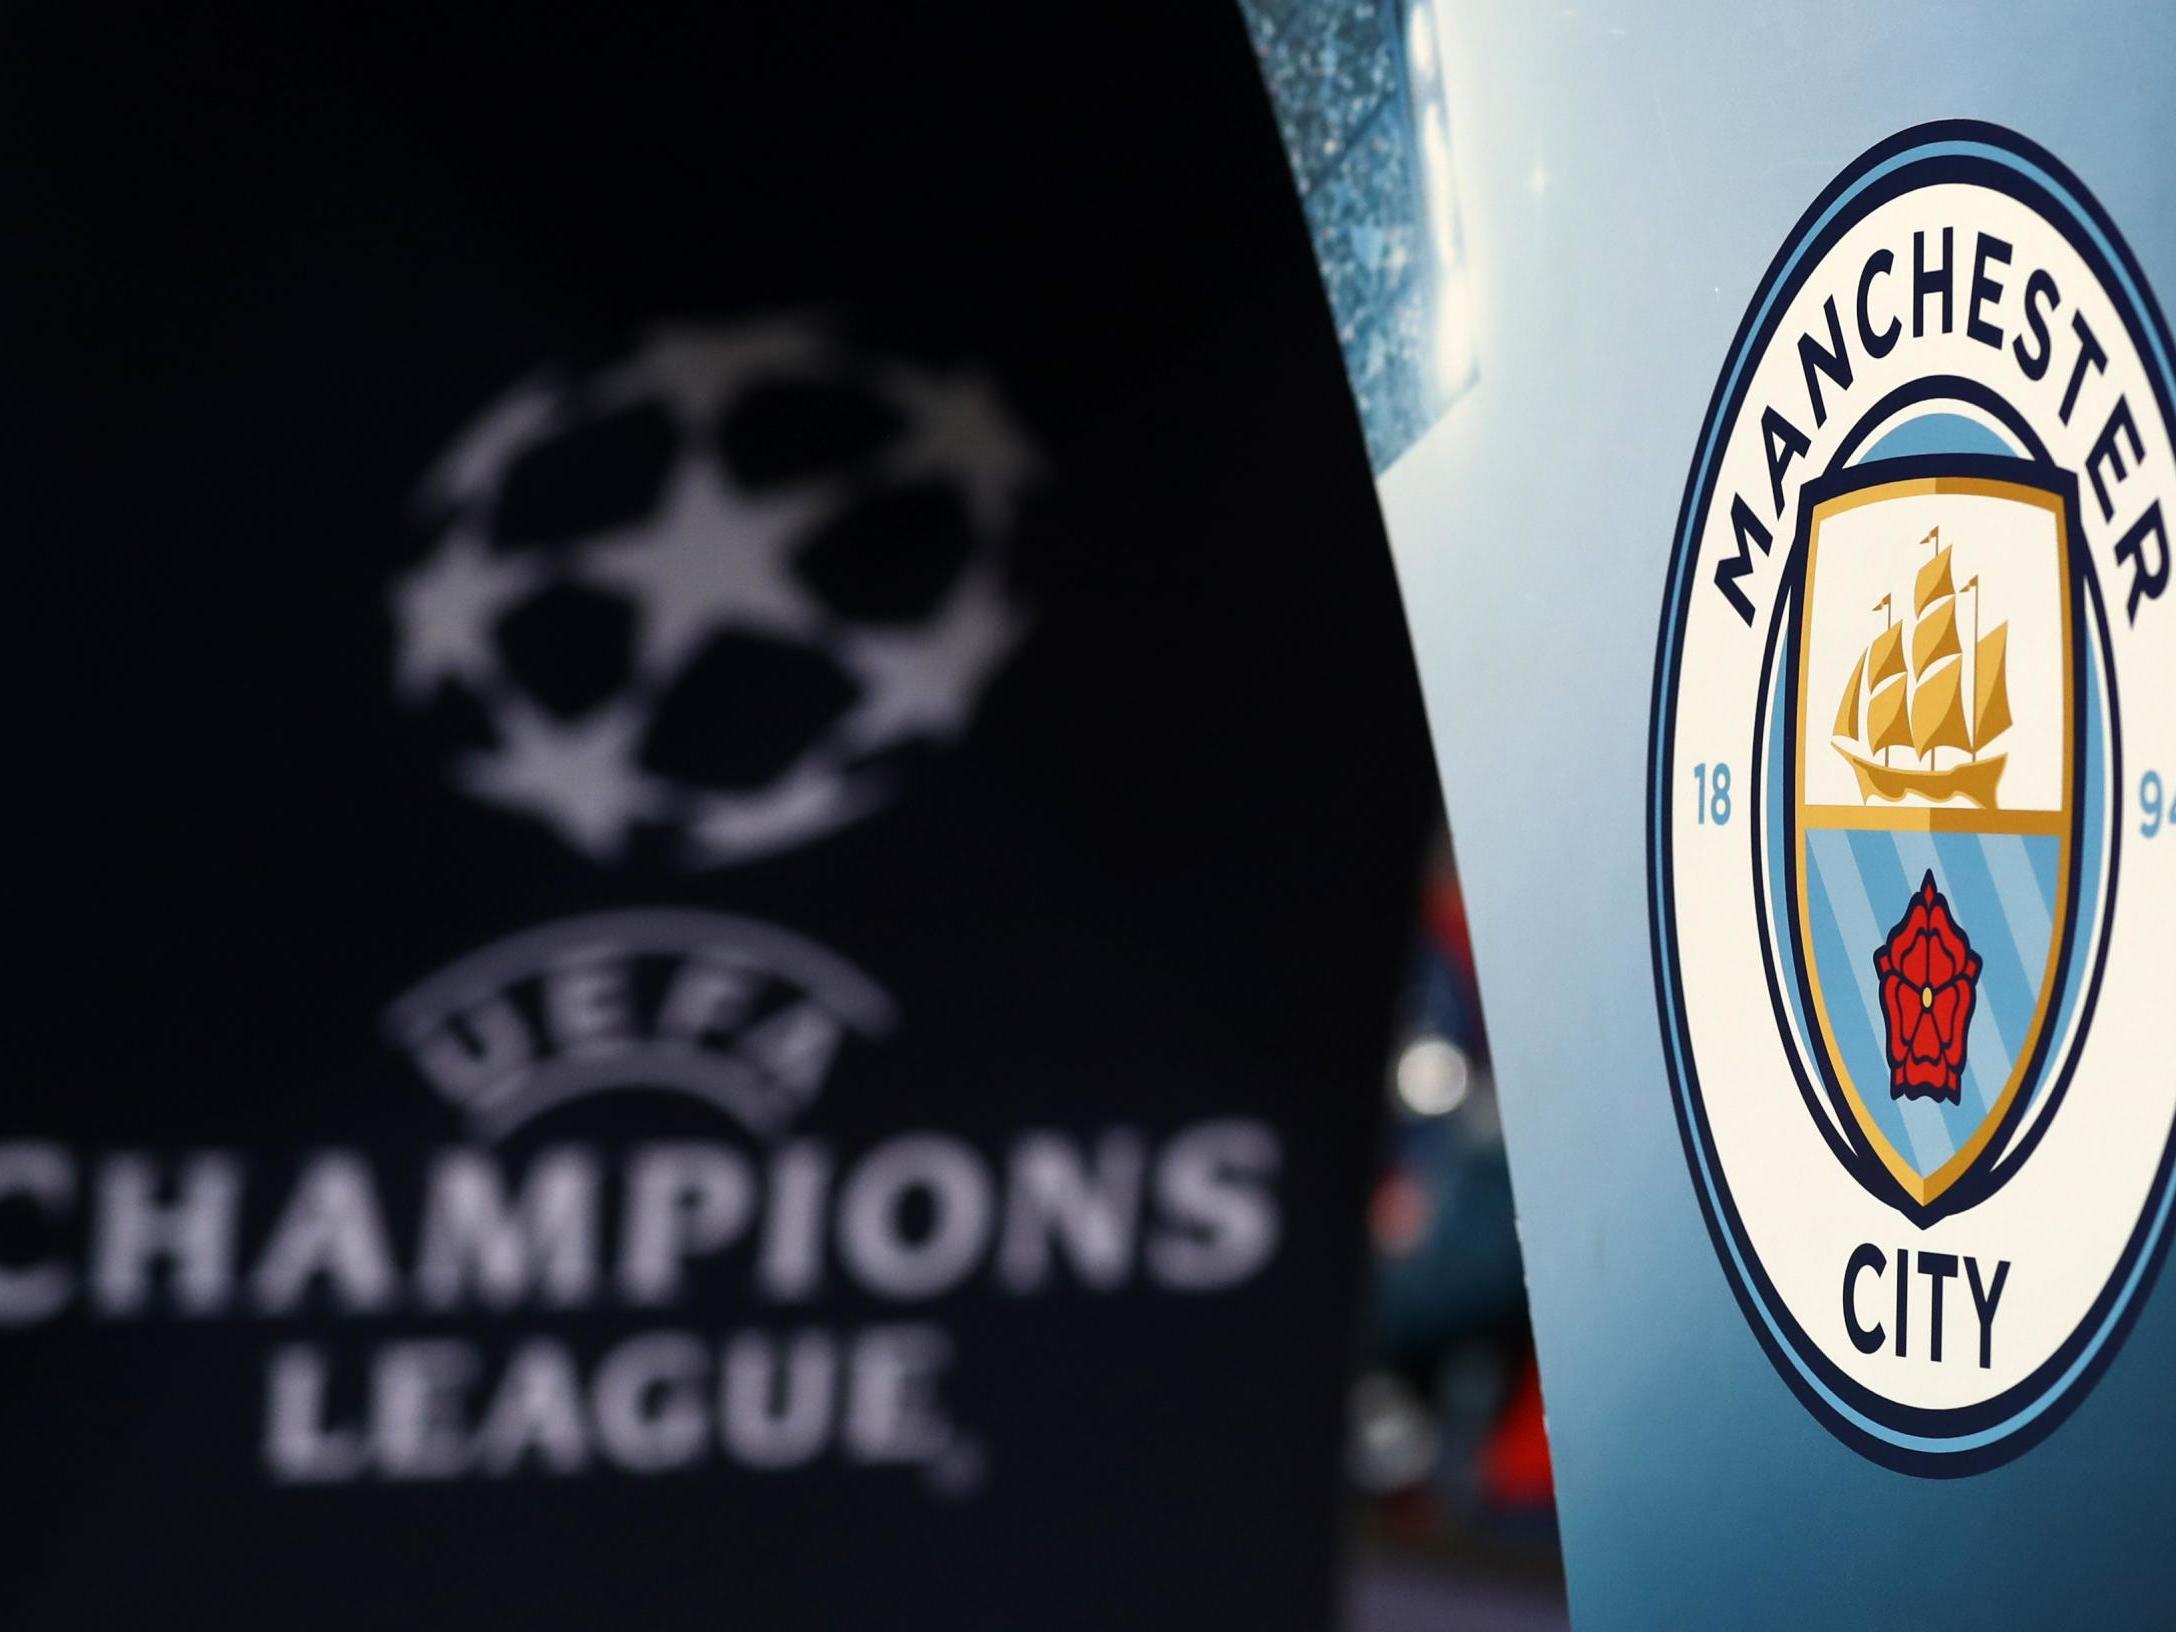 Man City are fighting the potential for a Champions League ban